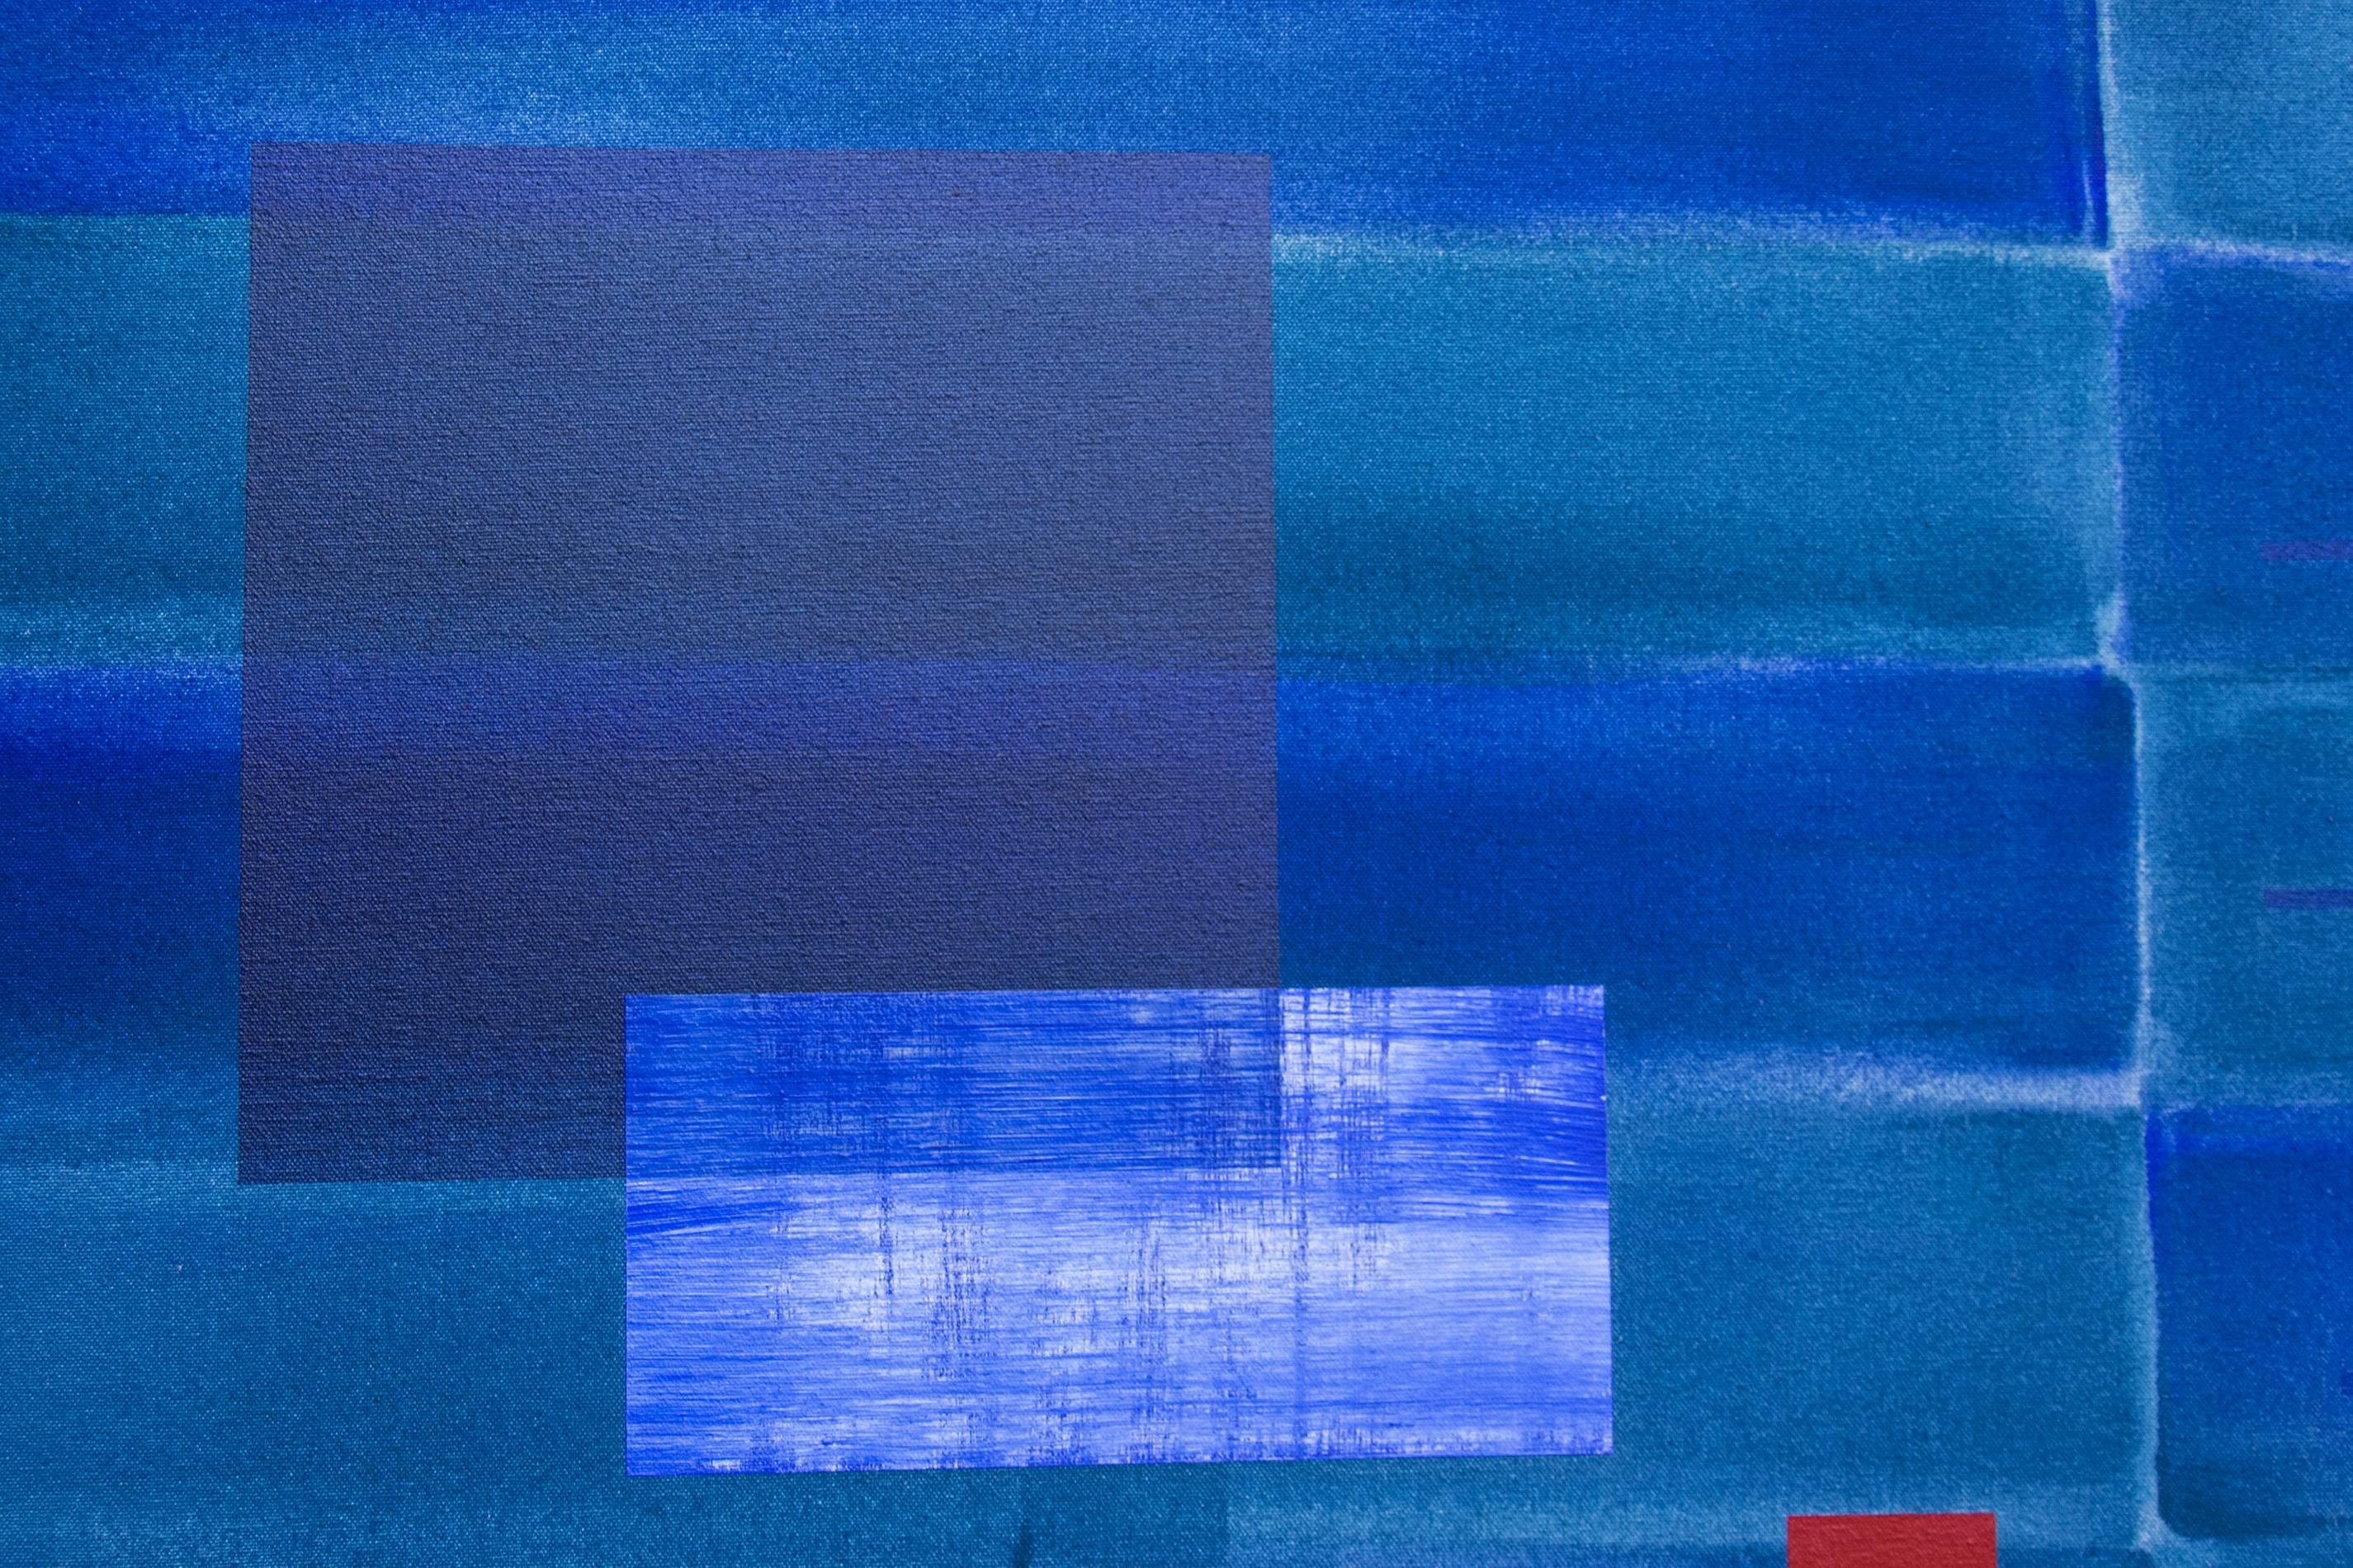 Curated orthogonal shapes of blue, yellow and red next to a drawn grid float on a ground of washed blue bars. This acrylic painting on canvas is exemplary of Ristvedt’s sustained interest in cerebral and minimalist explorations of color and gestural